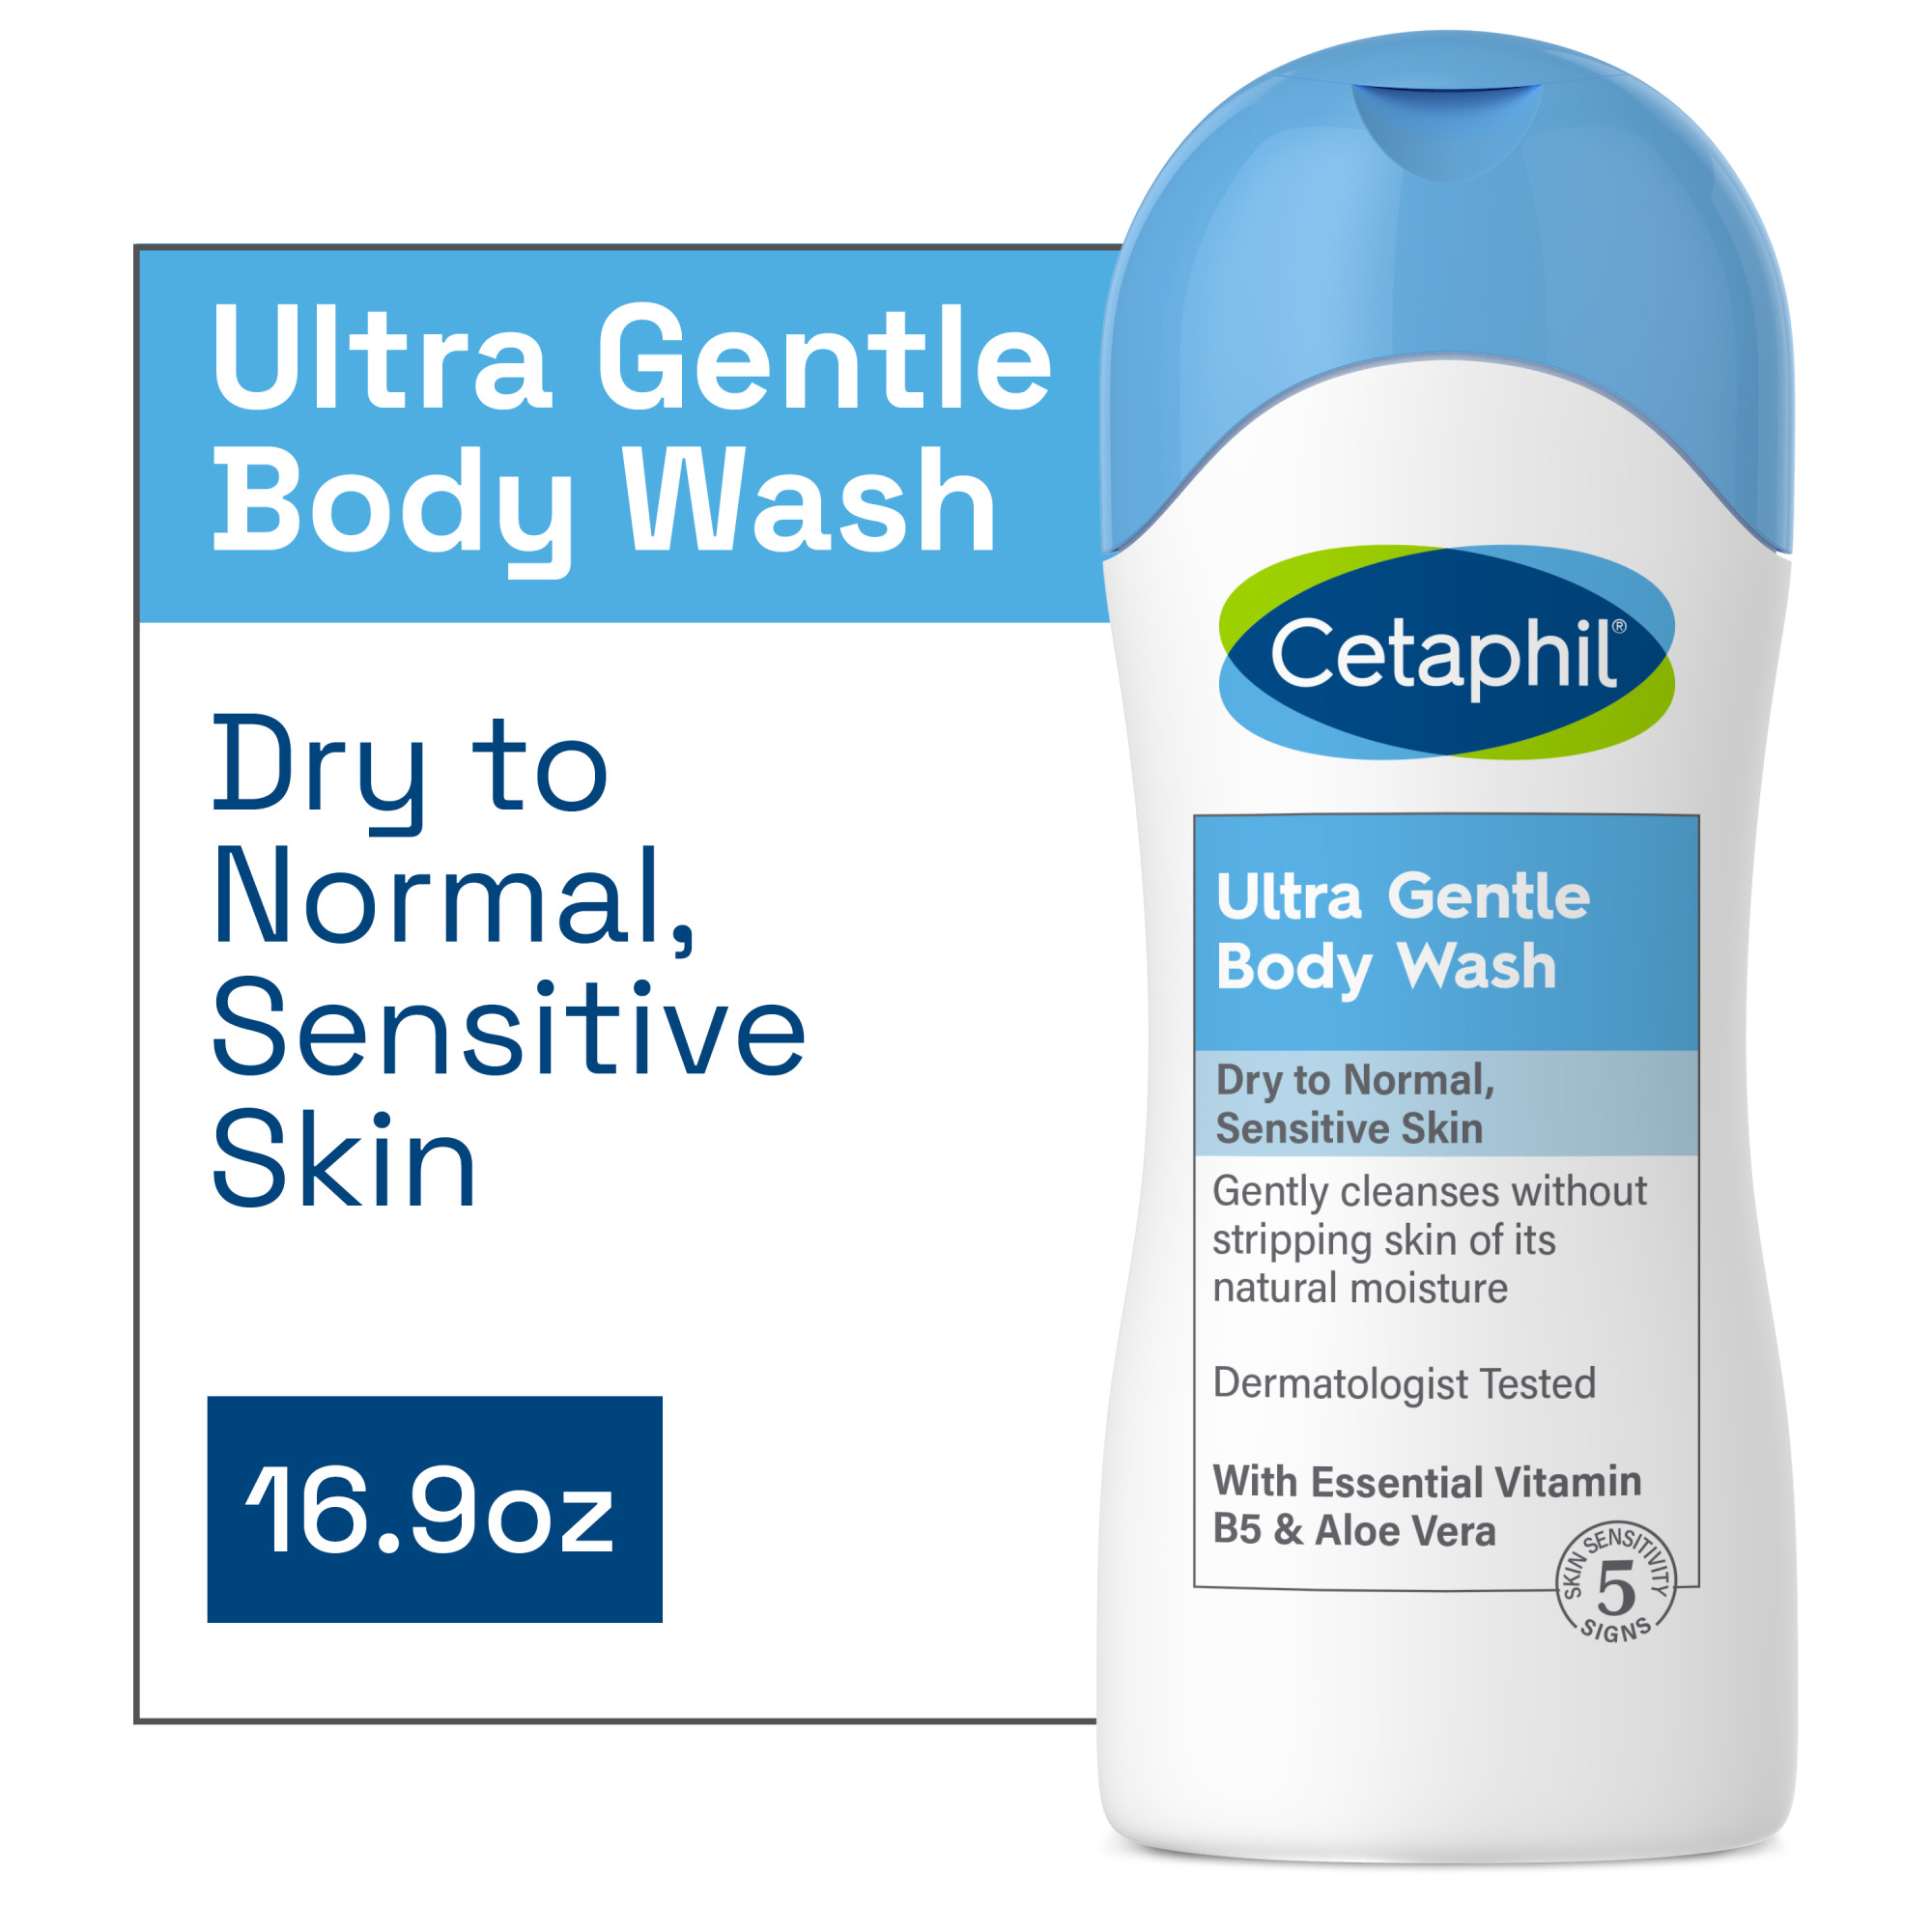 Cetaphil Ultra Gentle Body Wash, Fragrance Free, 16.9 oz, For Dry to Normal, Sensitive Skin - image 1 of 10